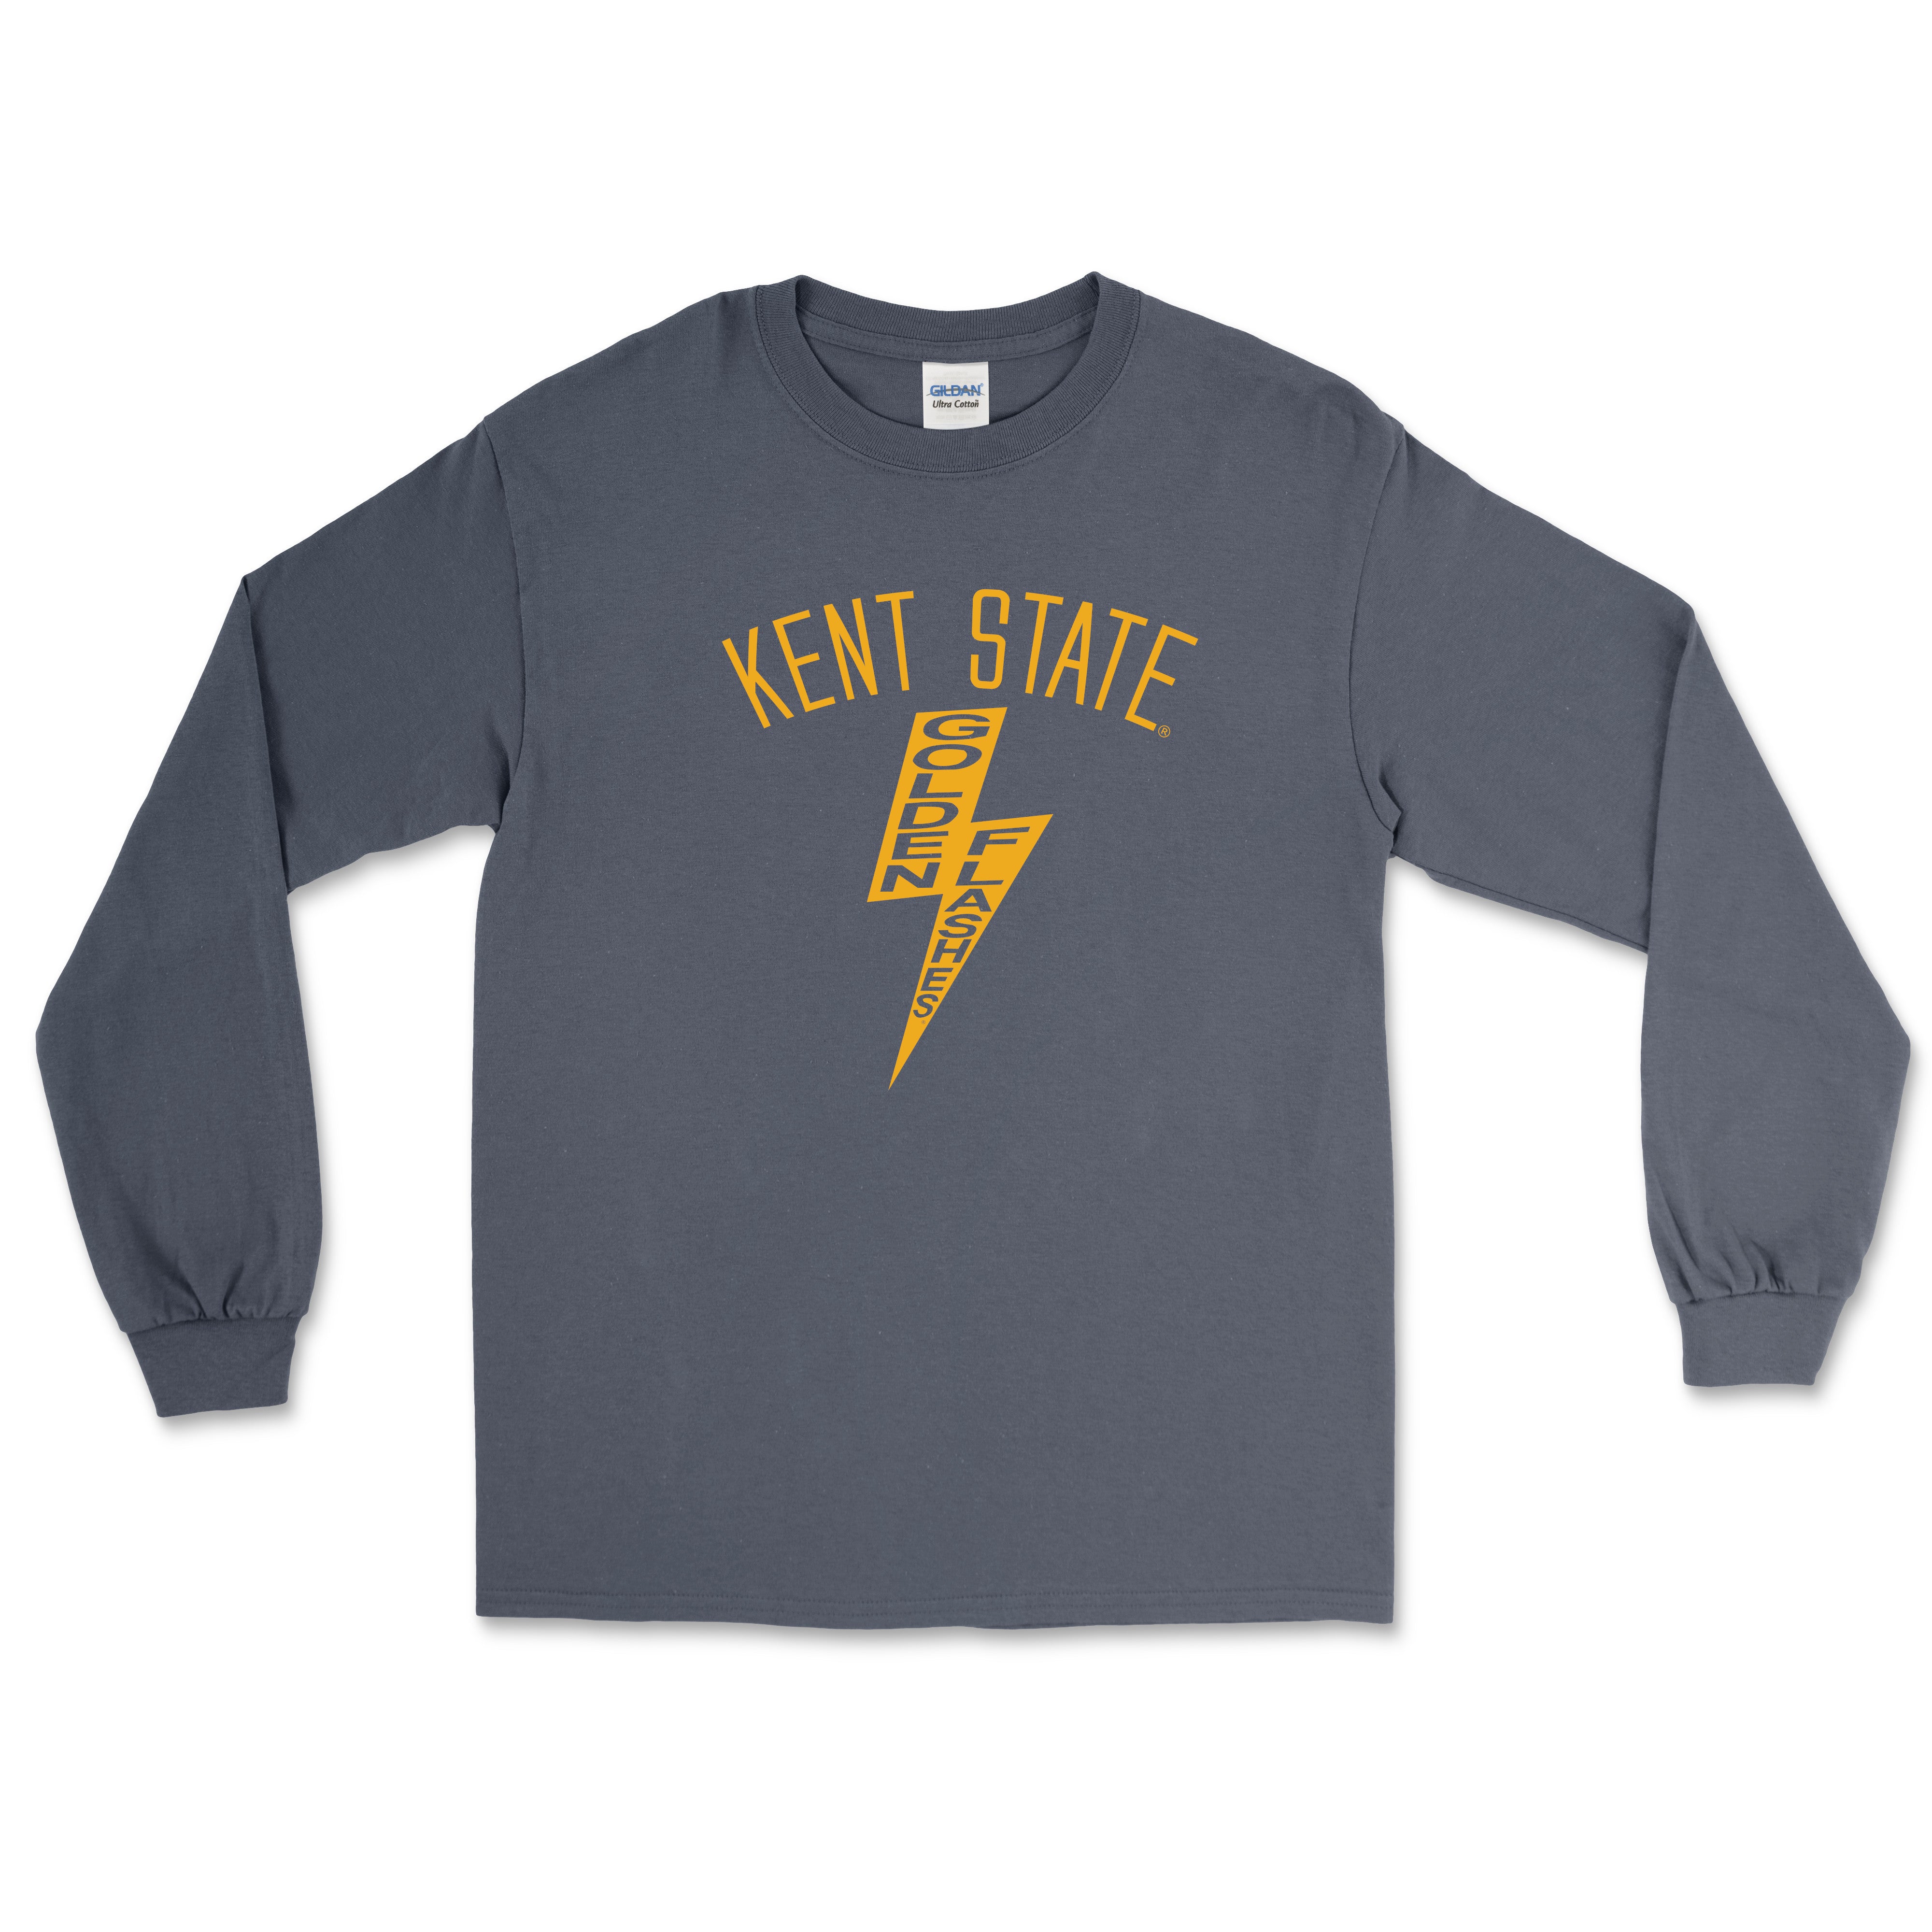 Kent State In Bolt Long Sleeve T-Shirt